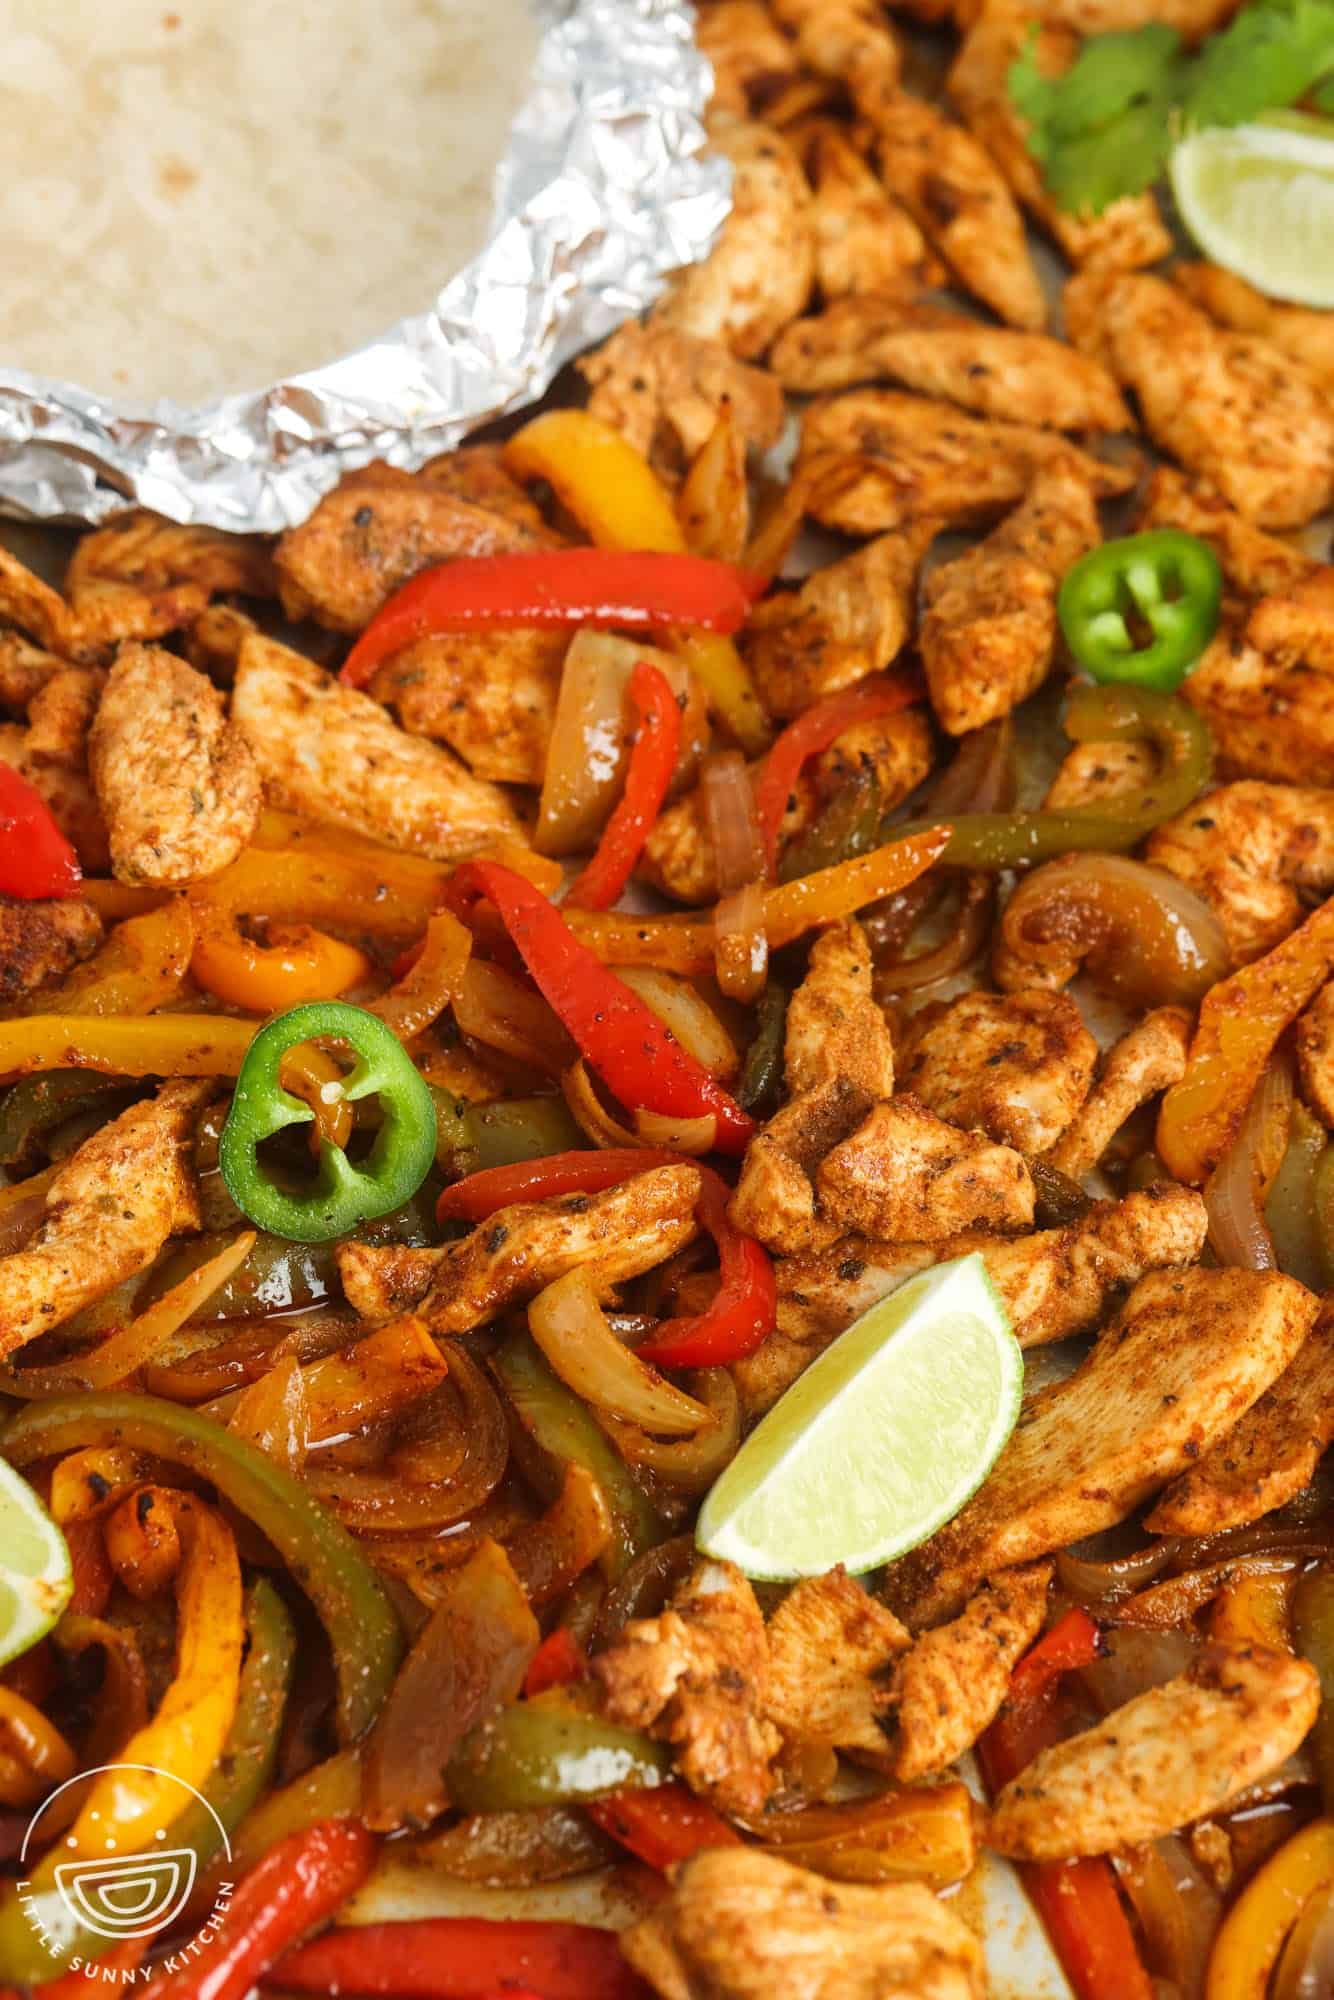 Chicken, peppers, and onions, cooked, on foil.